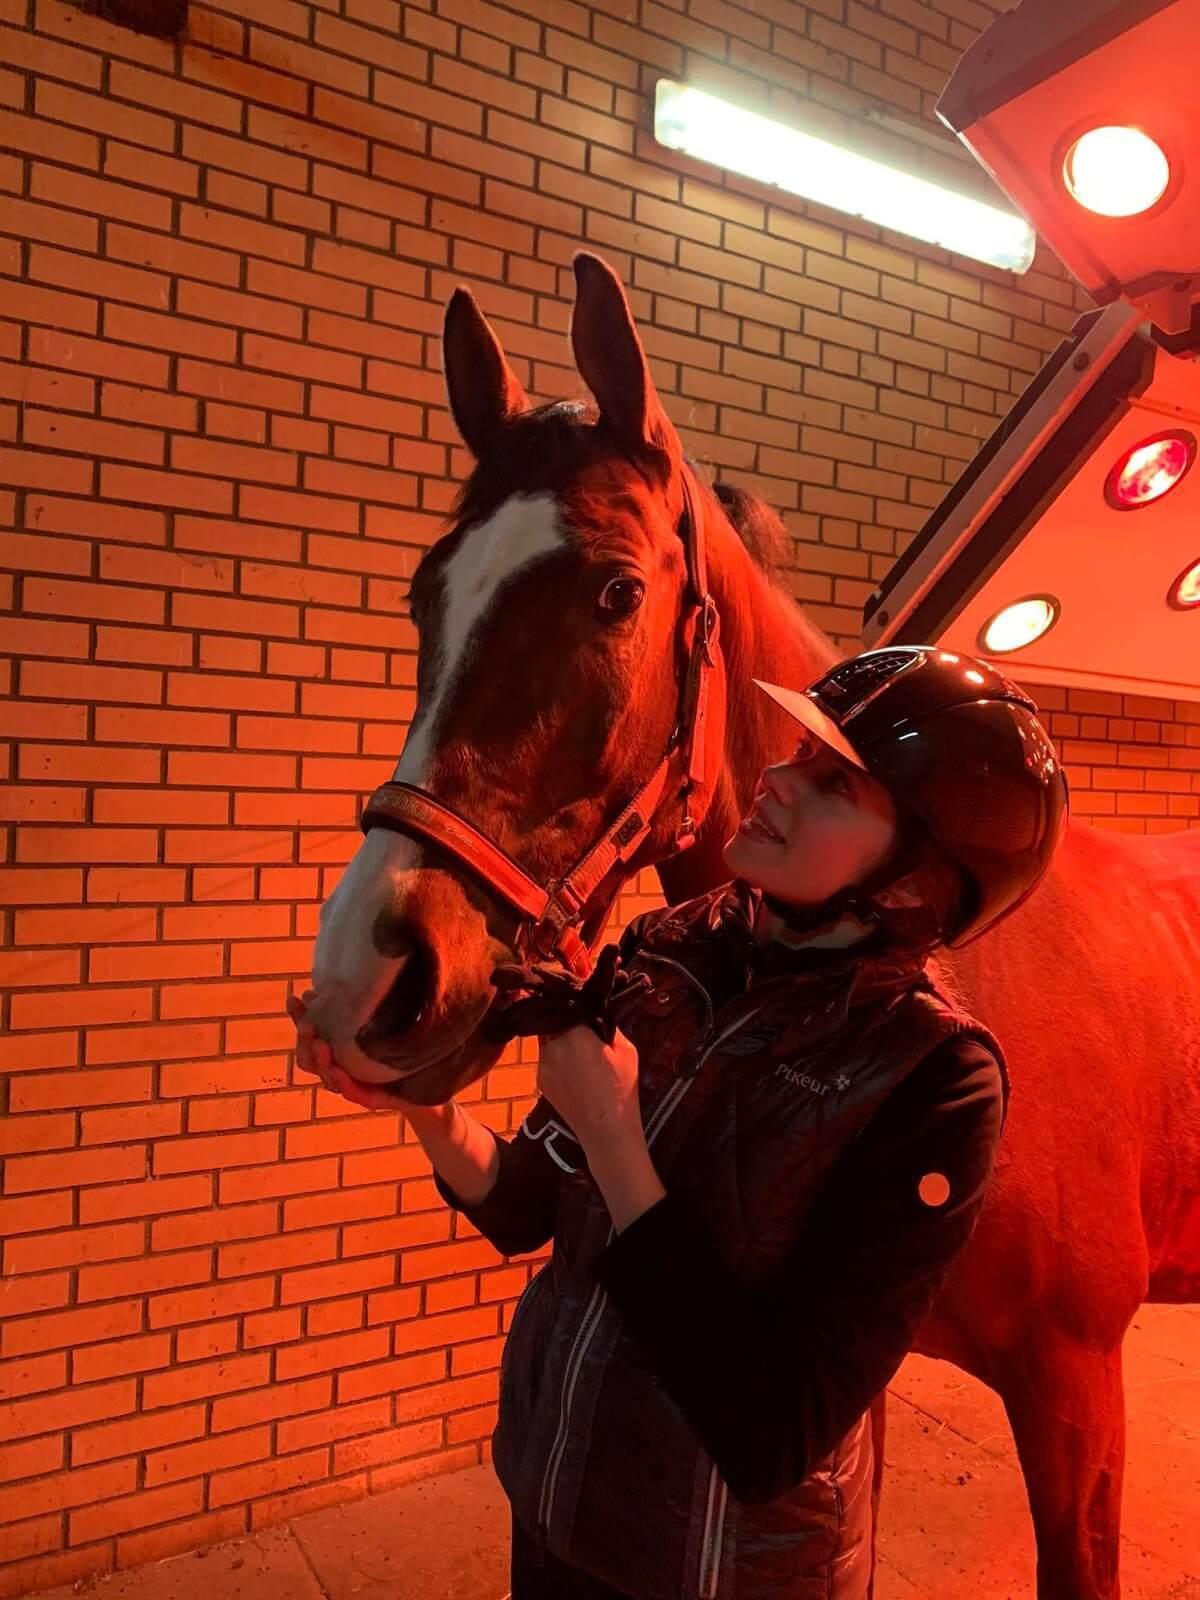 A photo of the author (Alexandra) with a horse